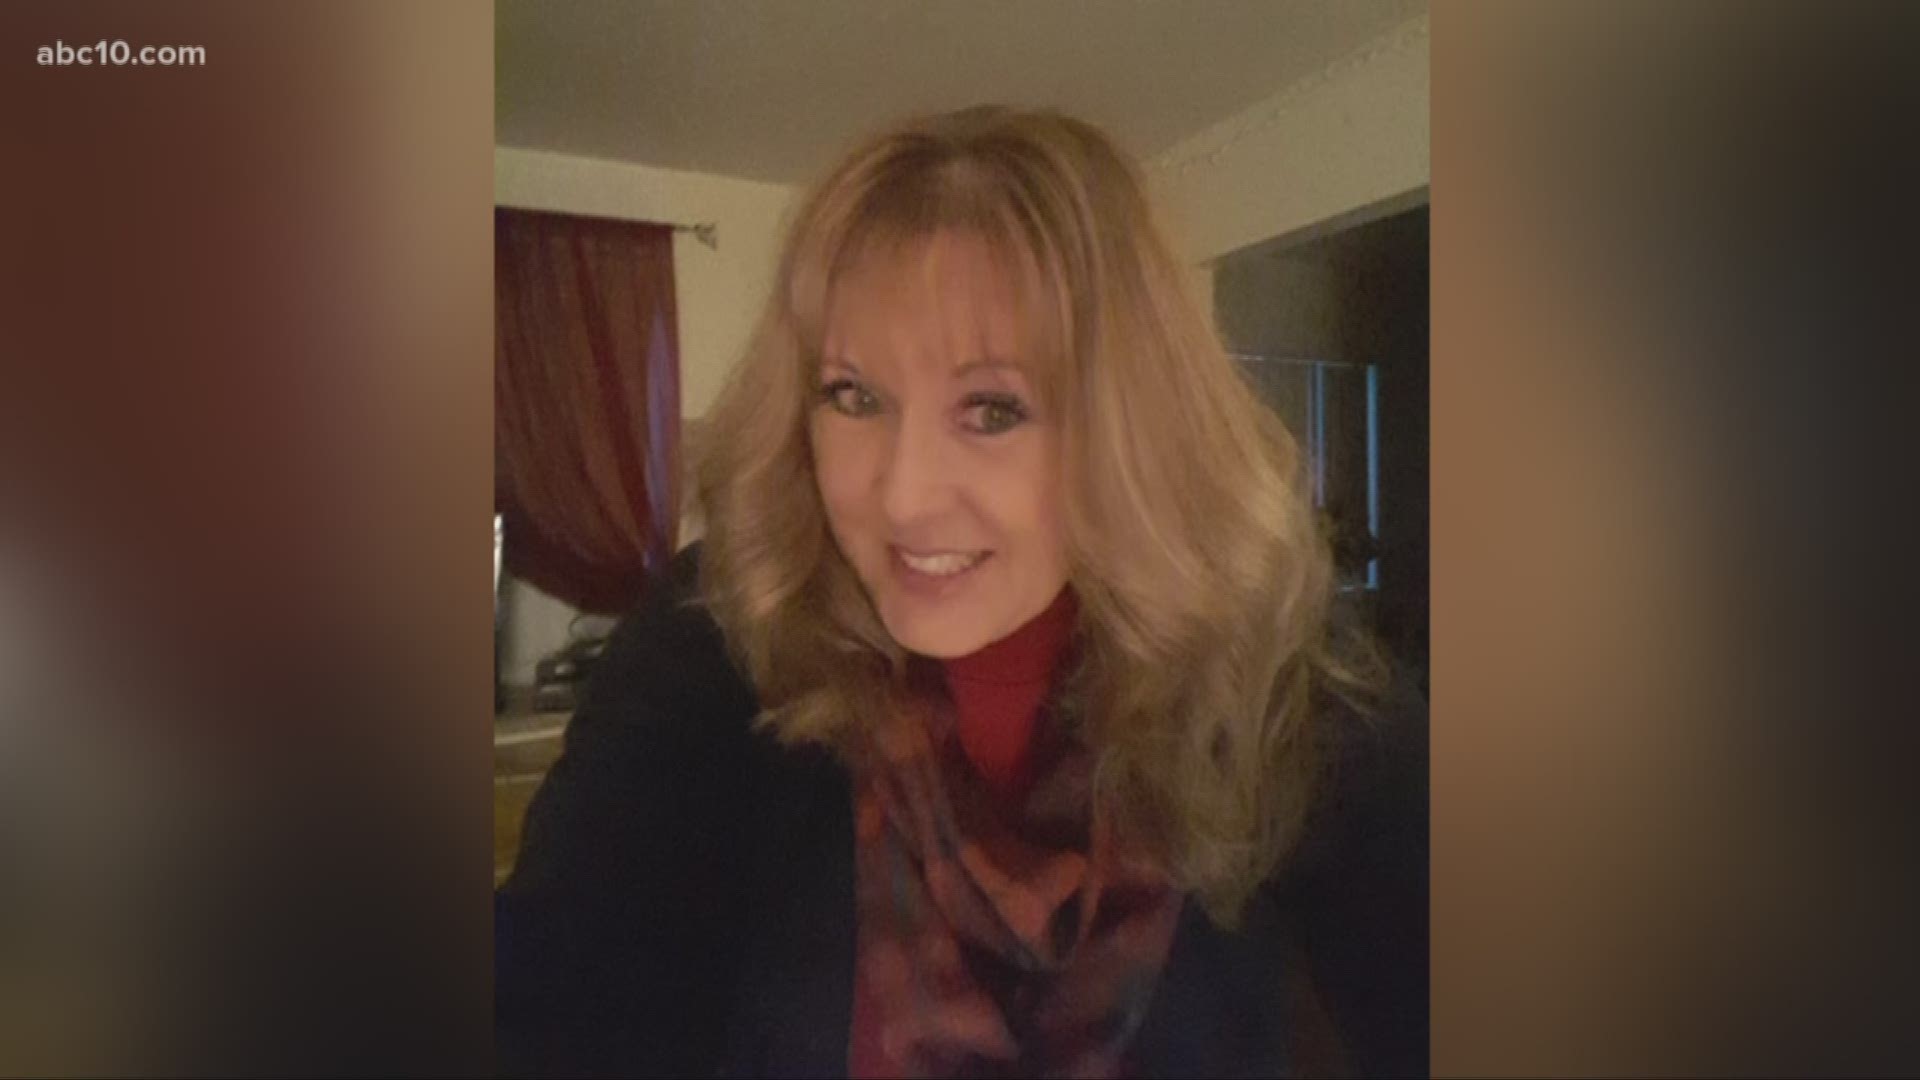 Deborah is the ABC10 Viewer of the Day for Feb. 12, 2020. If you want to be a viewer of the day text your picture to 916-321-3310.